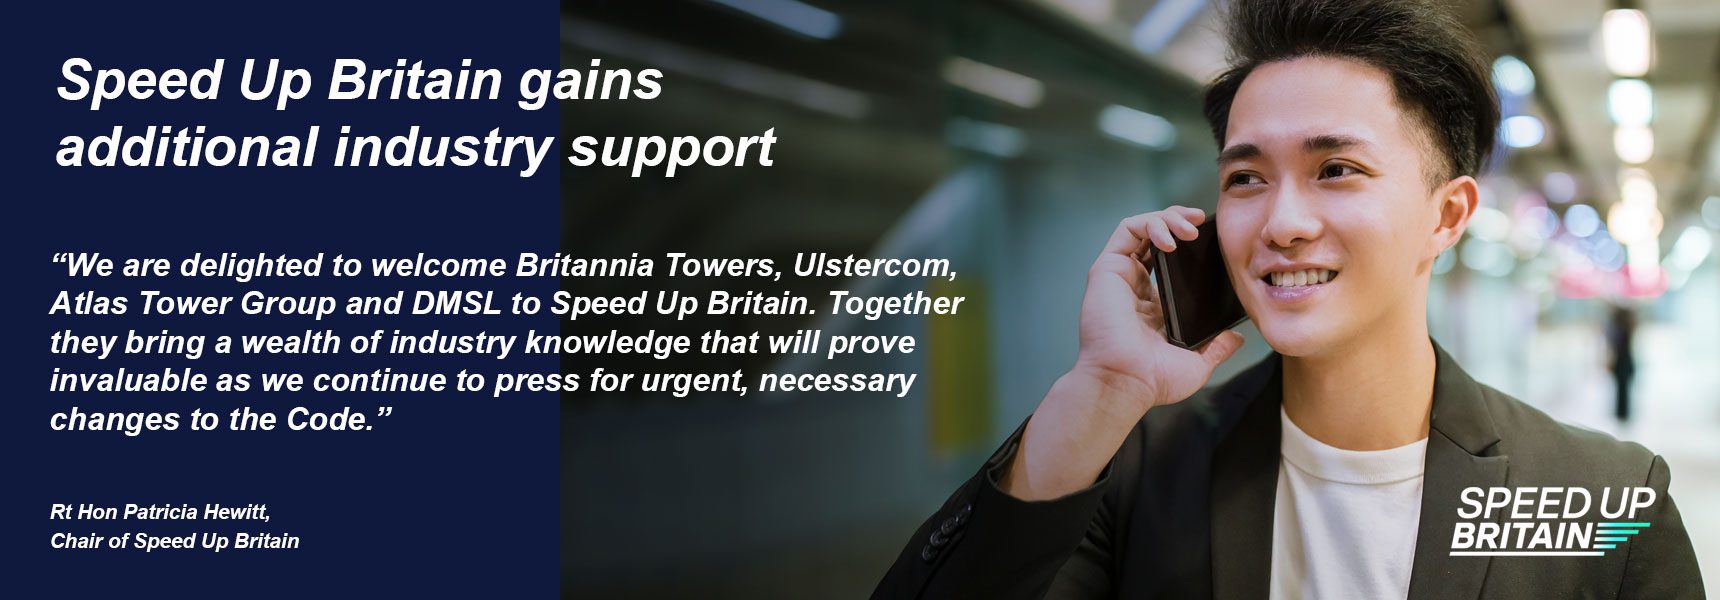 Speed Up Britain gains additional industry support